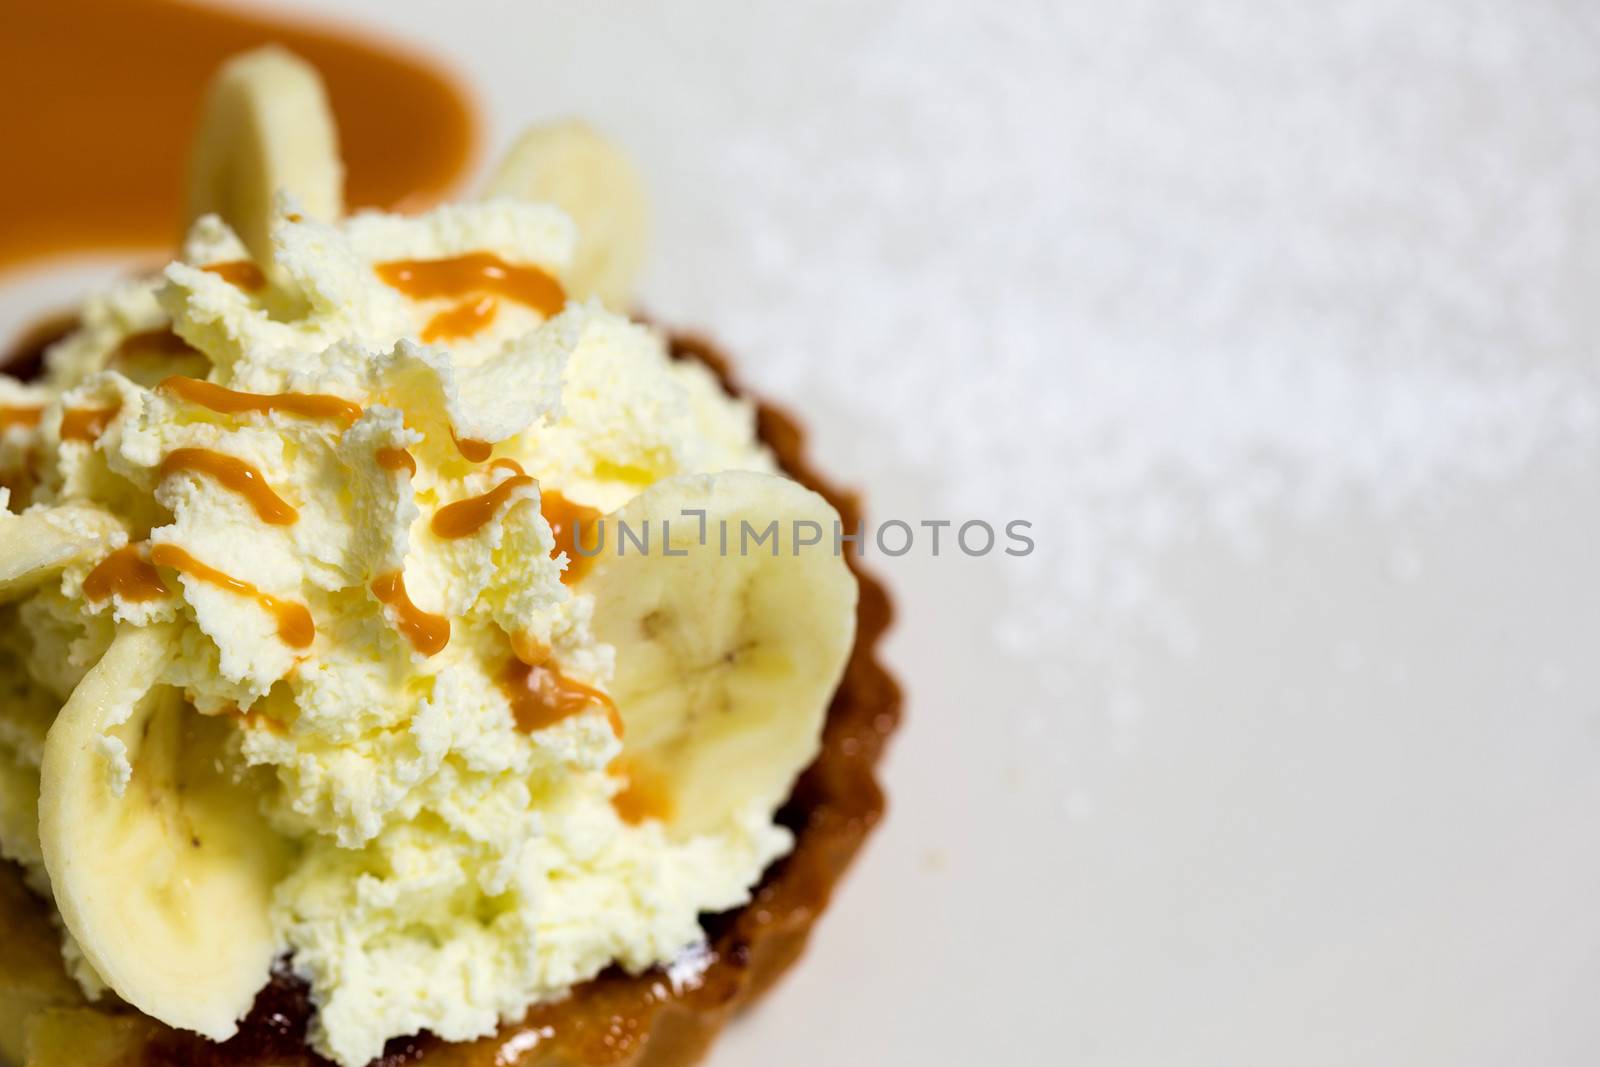 A fresh banana cream pie by stockyimages